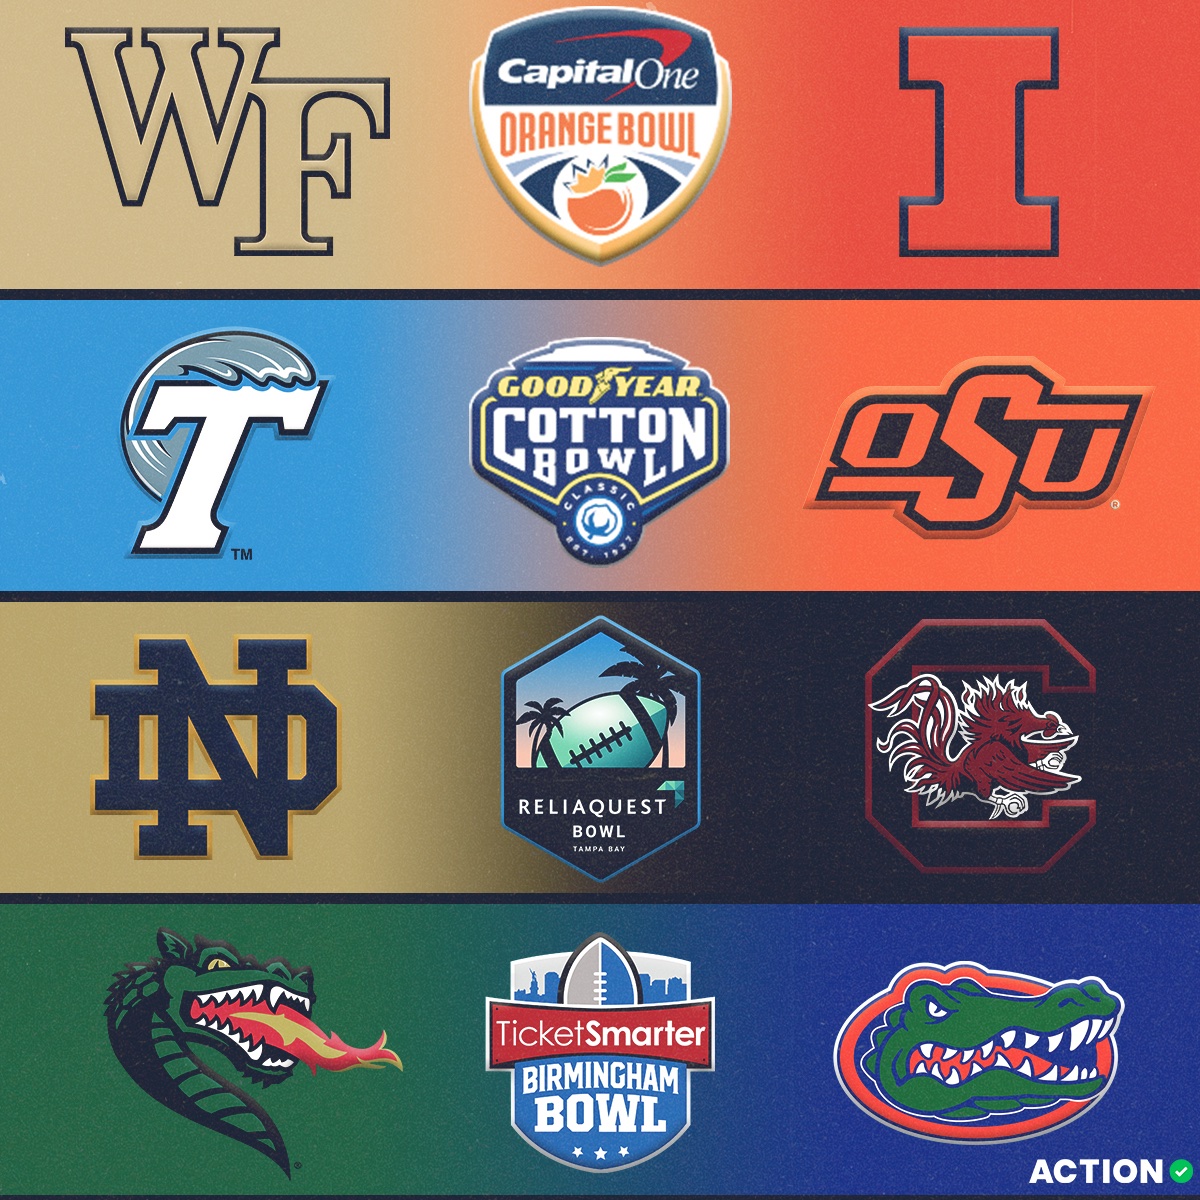 My new bowl projections for @ActionNetworkHQ include LSU-Utah (Las Vegas), Baylor-Texas A&M (Liberty), Duke-UCLA (Sun), BYU-UCF (Cure). So far, 27 teams bowl-eligible but we're still on pace for record number of teams in bowls w/losing records this season actionnetwork.com/ncaaf/college-…